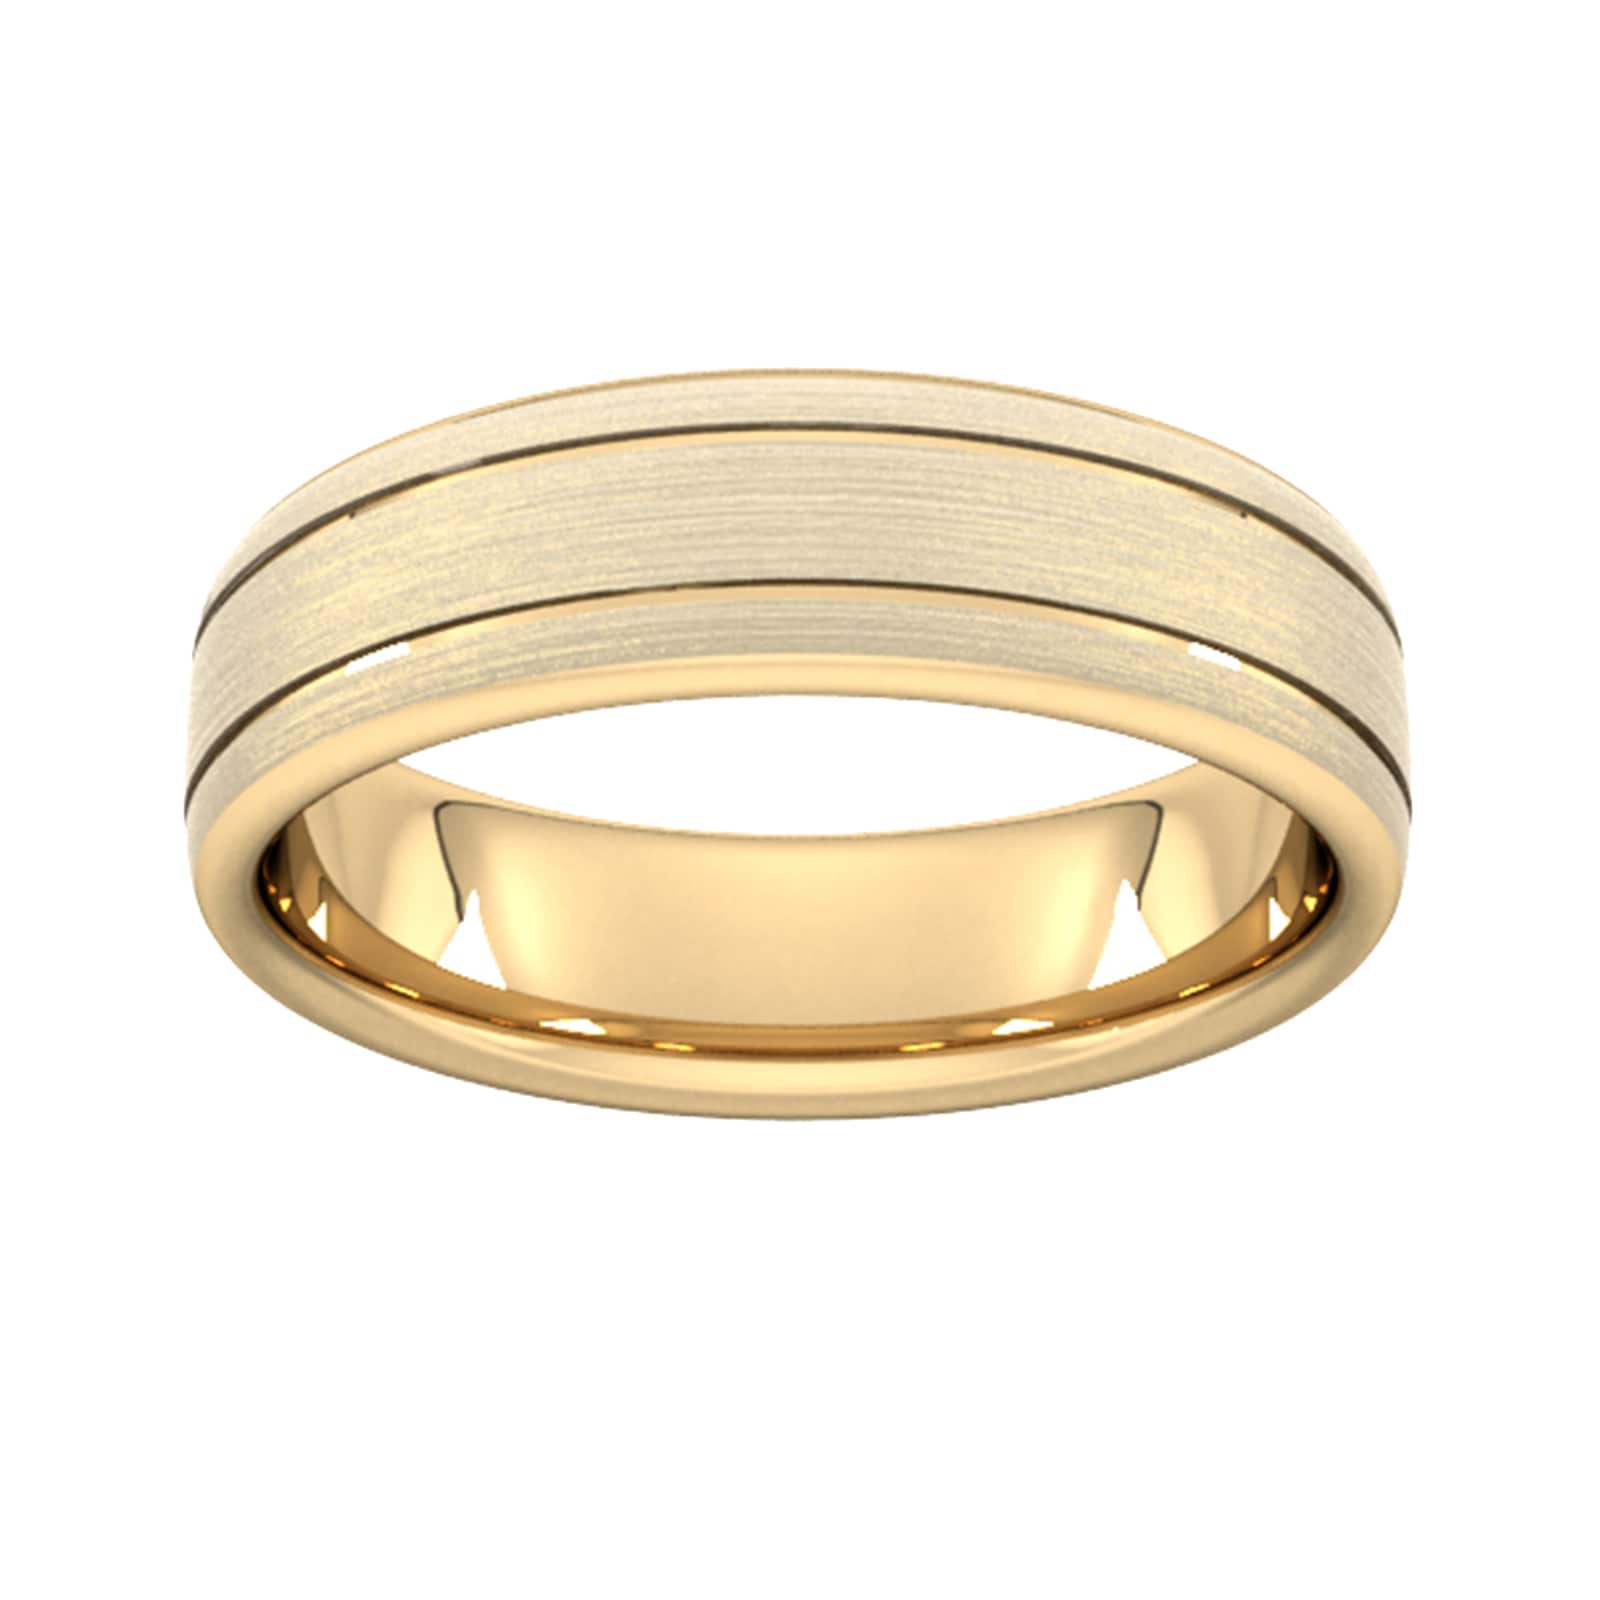 6mm Flat Court Heavy Matt Finish With Double Grooves Wedding Ring In 18 Carat Yellow Gold - Ring Size G